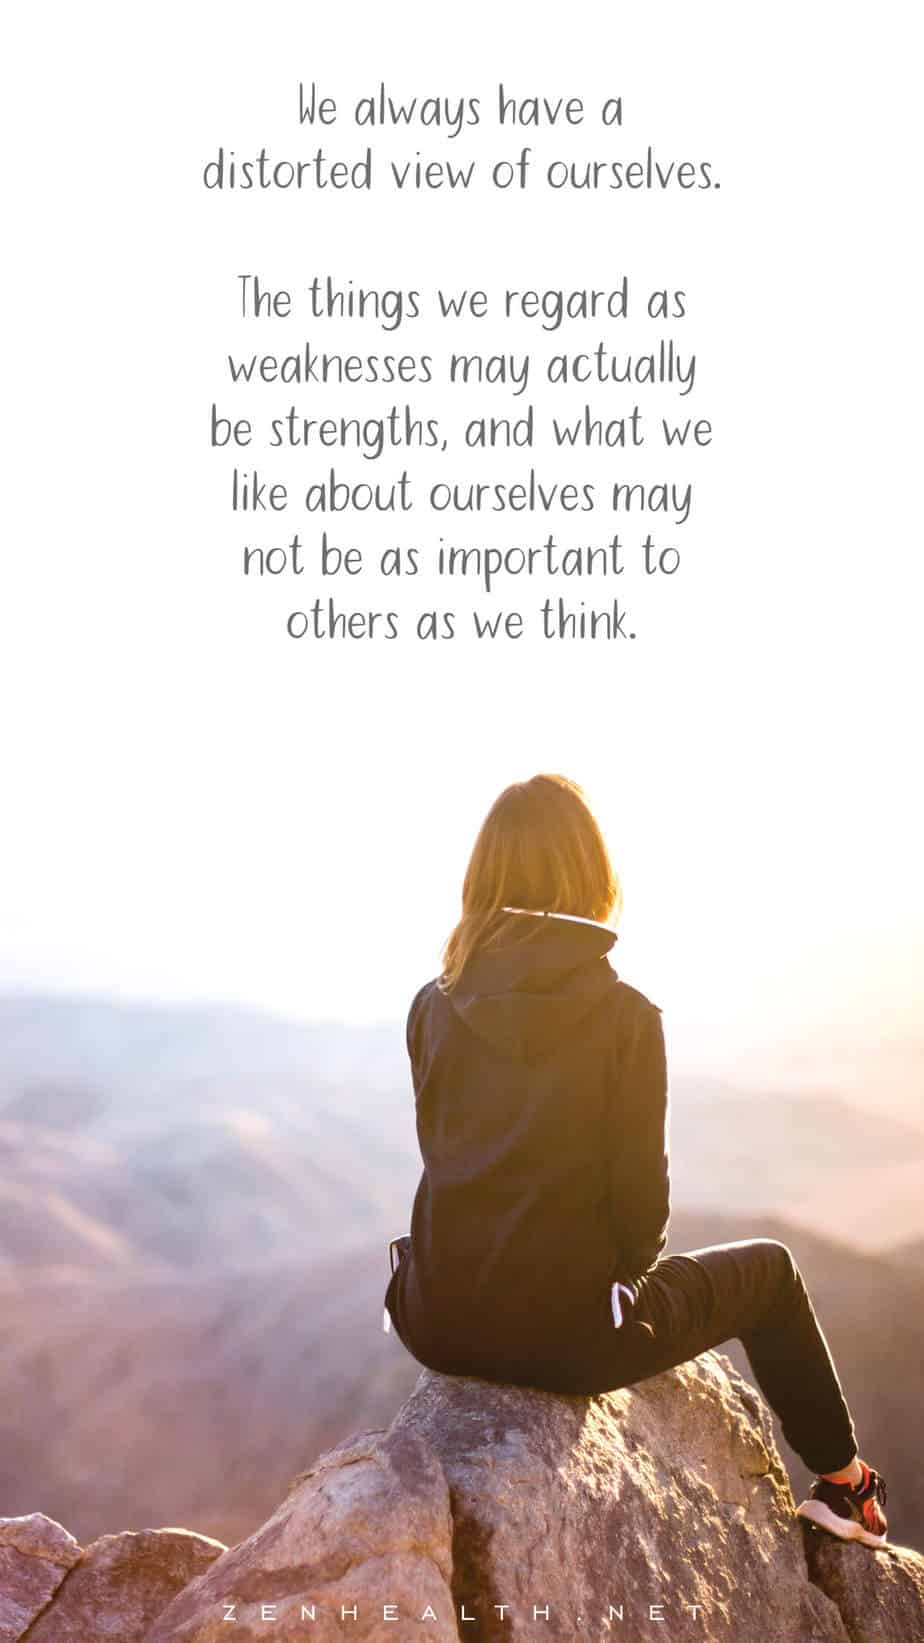 We always have a distorted view of ourselves. The things we regard as weaknesses may actually be strengths, and what we like about ourselves may not be as important to others as we think.